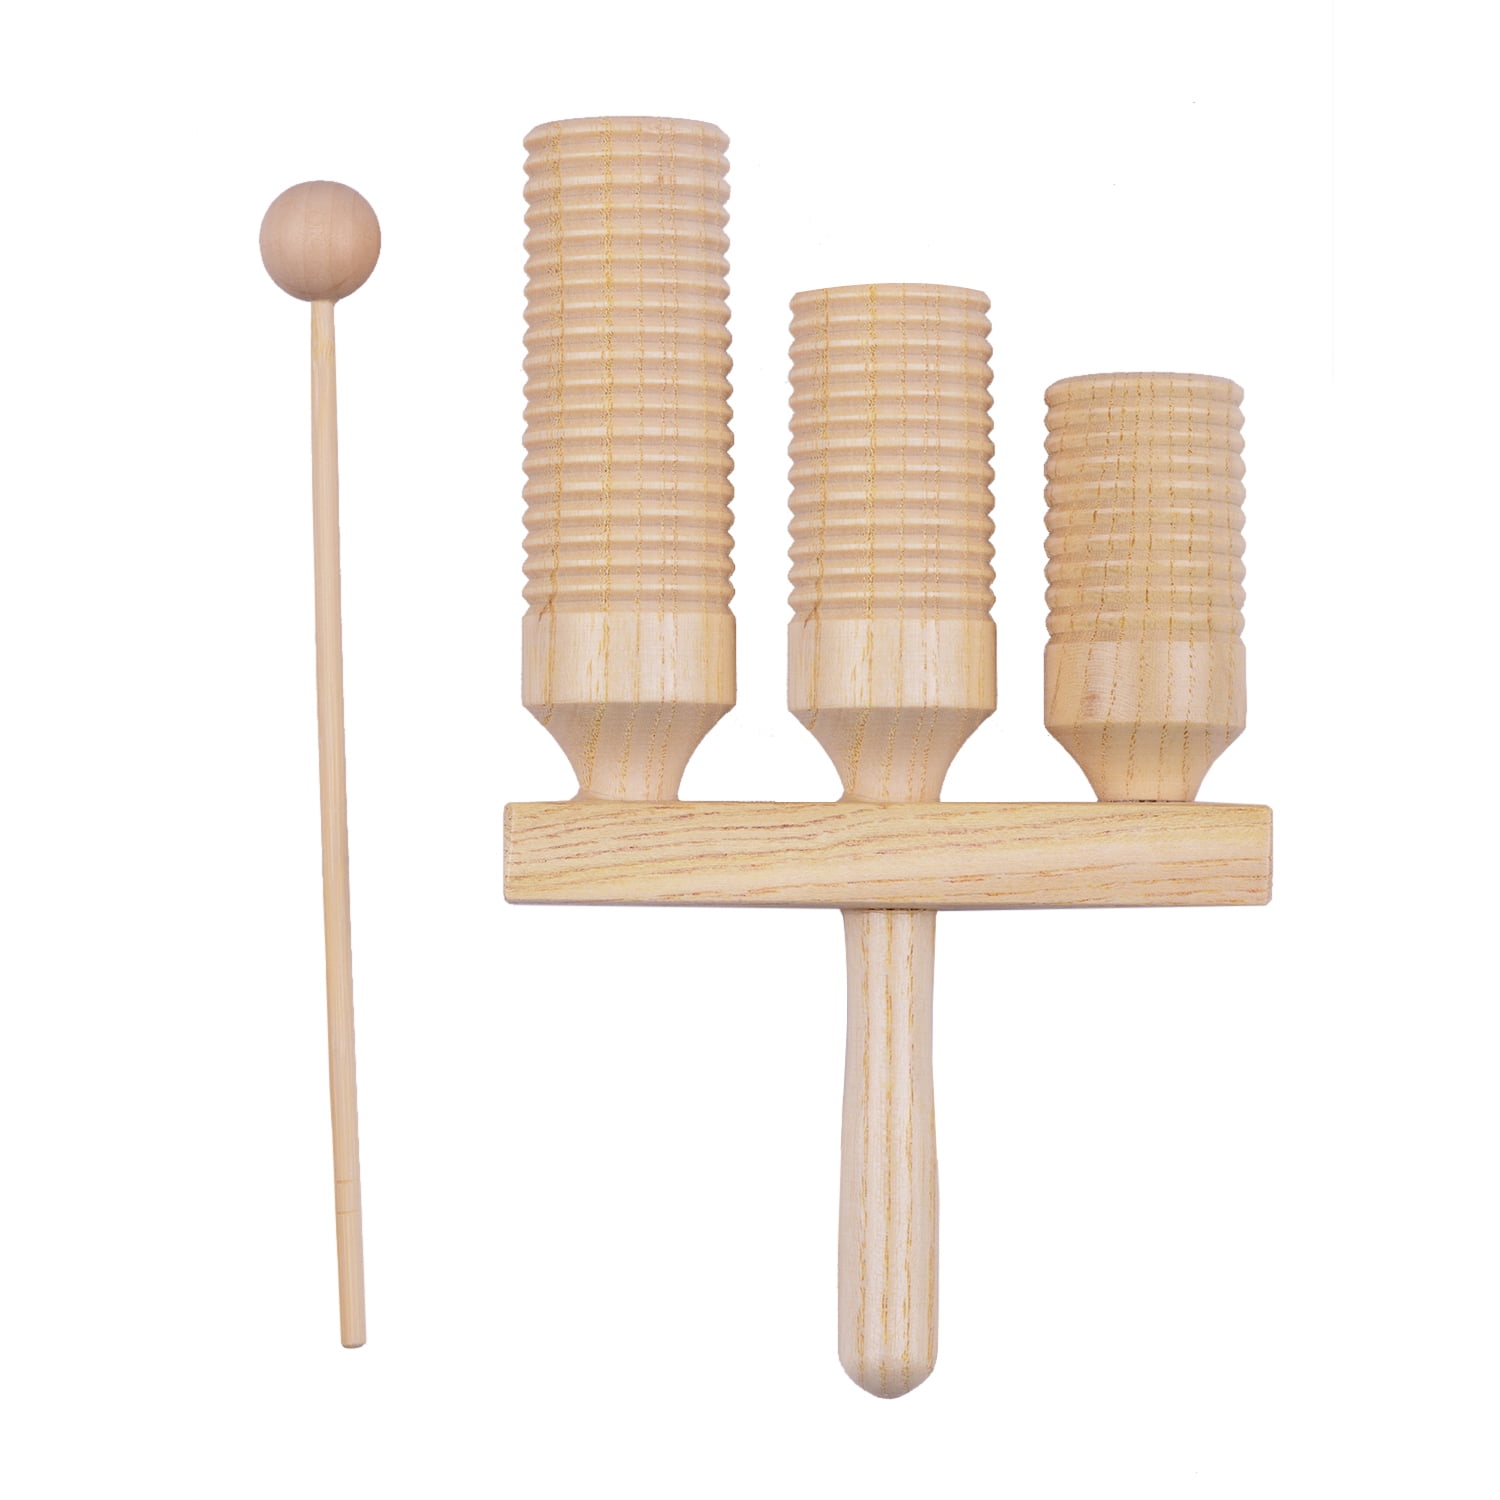 New Musical Toy Mallet Musical Block Woodblock Learning Percussion Instrument Y2 